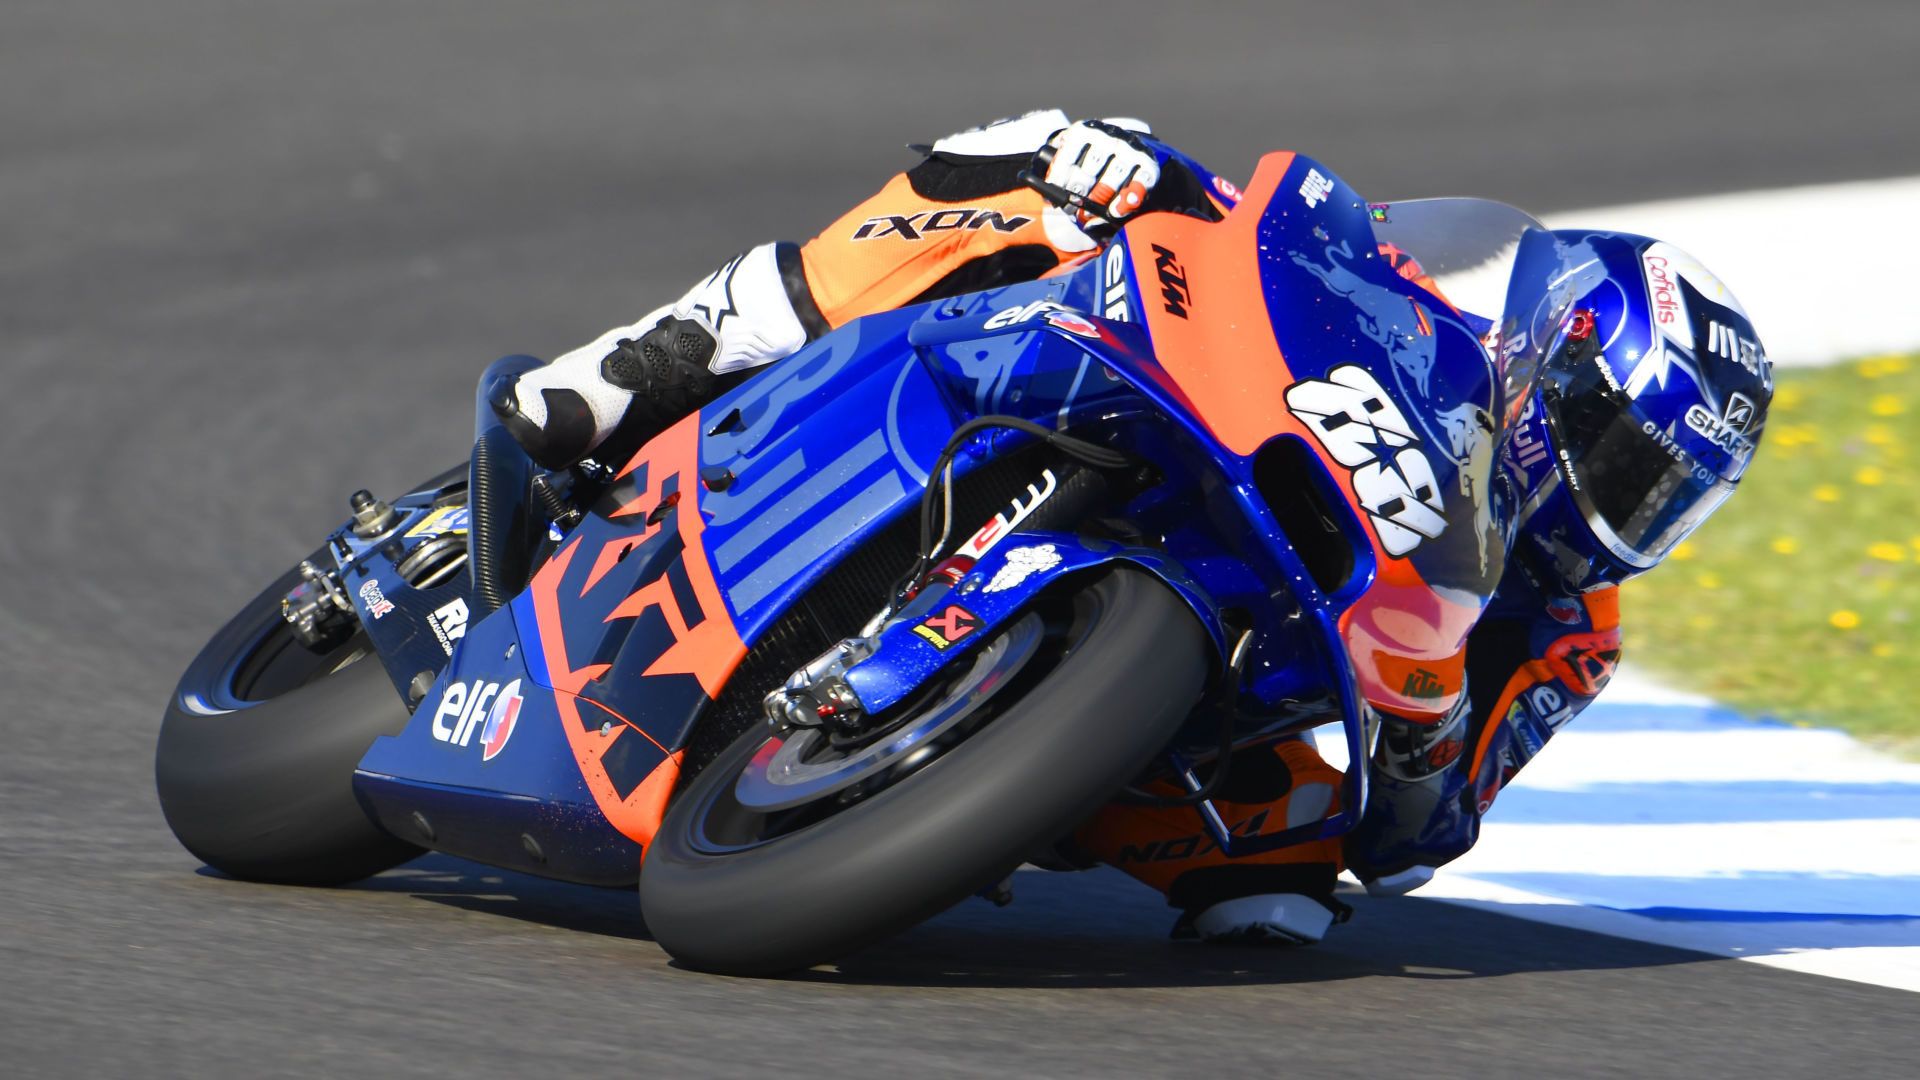 MotoGP: Miguel Oliveira Will Remain With Red Bull KTM Tech3 Team Through 2020 World Magazine. Motorcycle Riding, Racing & Tech News